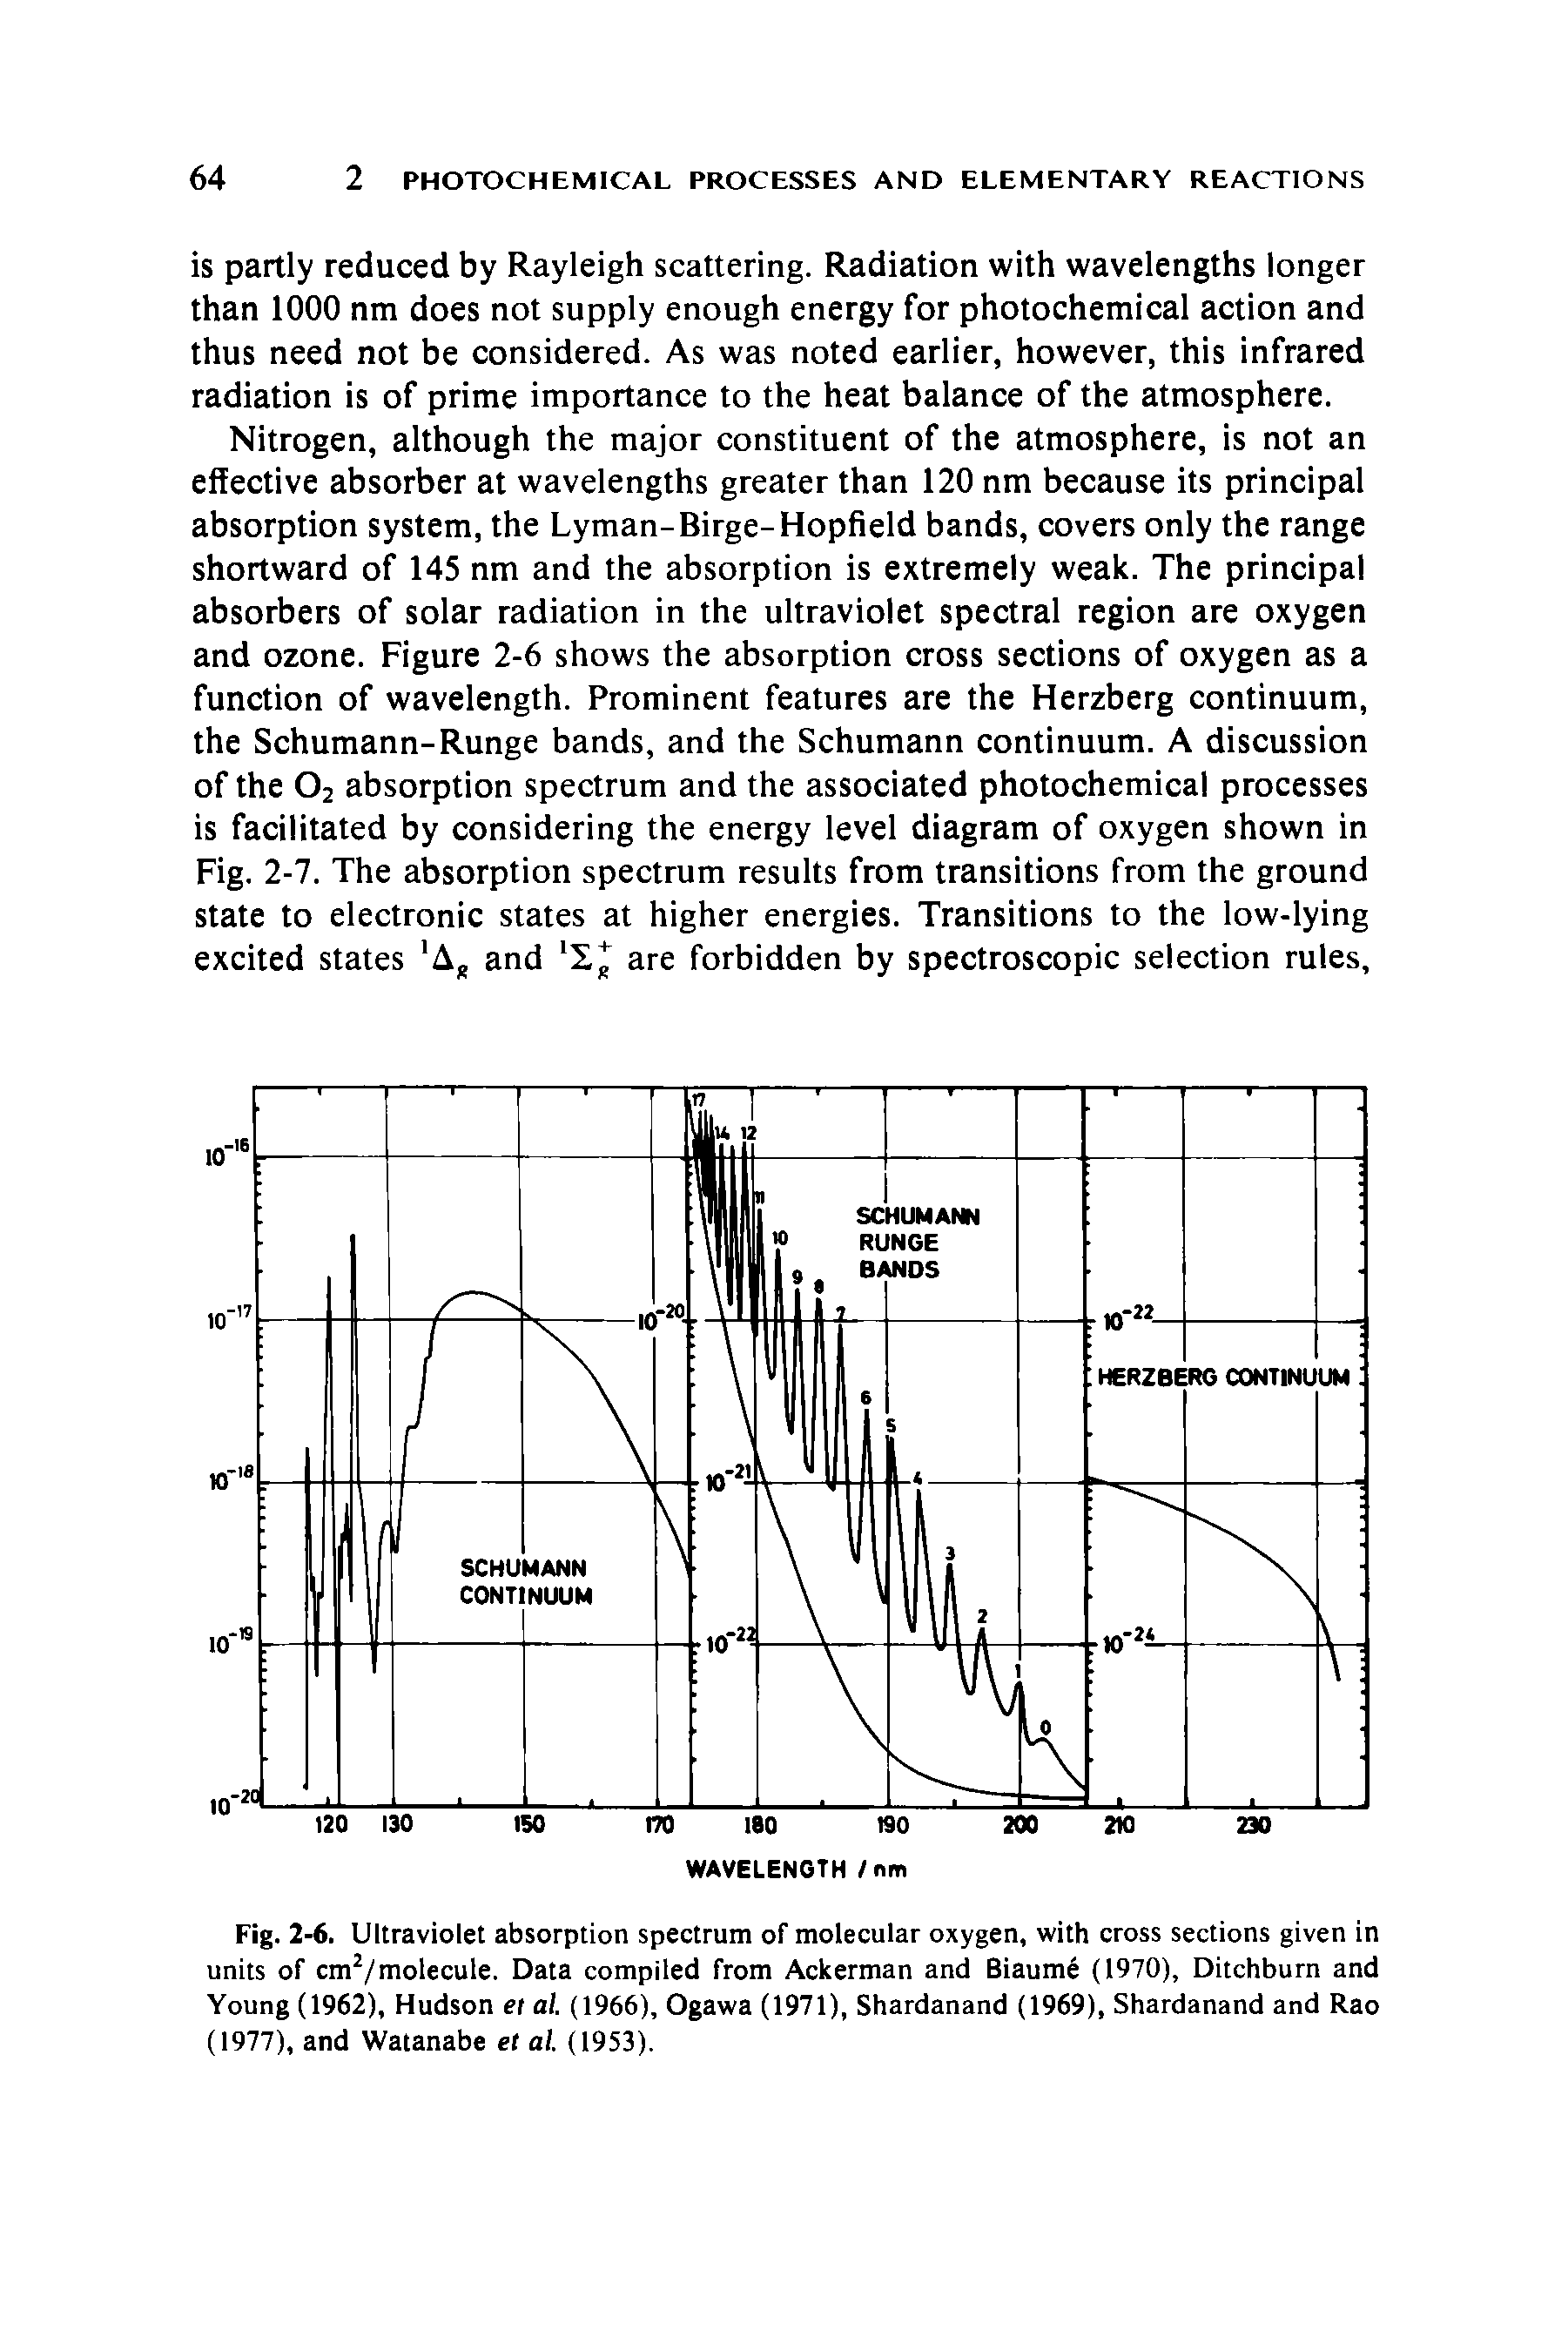 Fig. 2-6. Ultraviolet absorption spectrum of molecular oxygen, with cross sections given in units of cm2/molecule. Data compiled from Ackerman and Biaume (1970), Ditchburn and Young (1962), Hudson ei al. (1966), Ogawa (1971), Shardanand (1969), Shardanand and Rao (1977), and Watanabe et al. (1953).